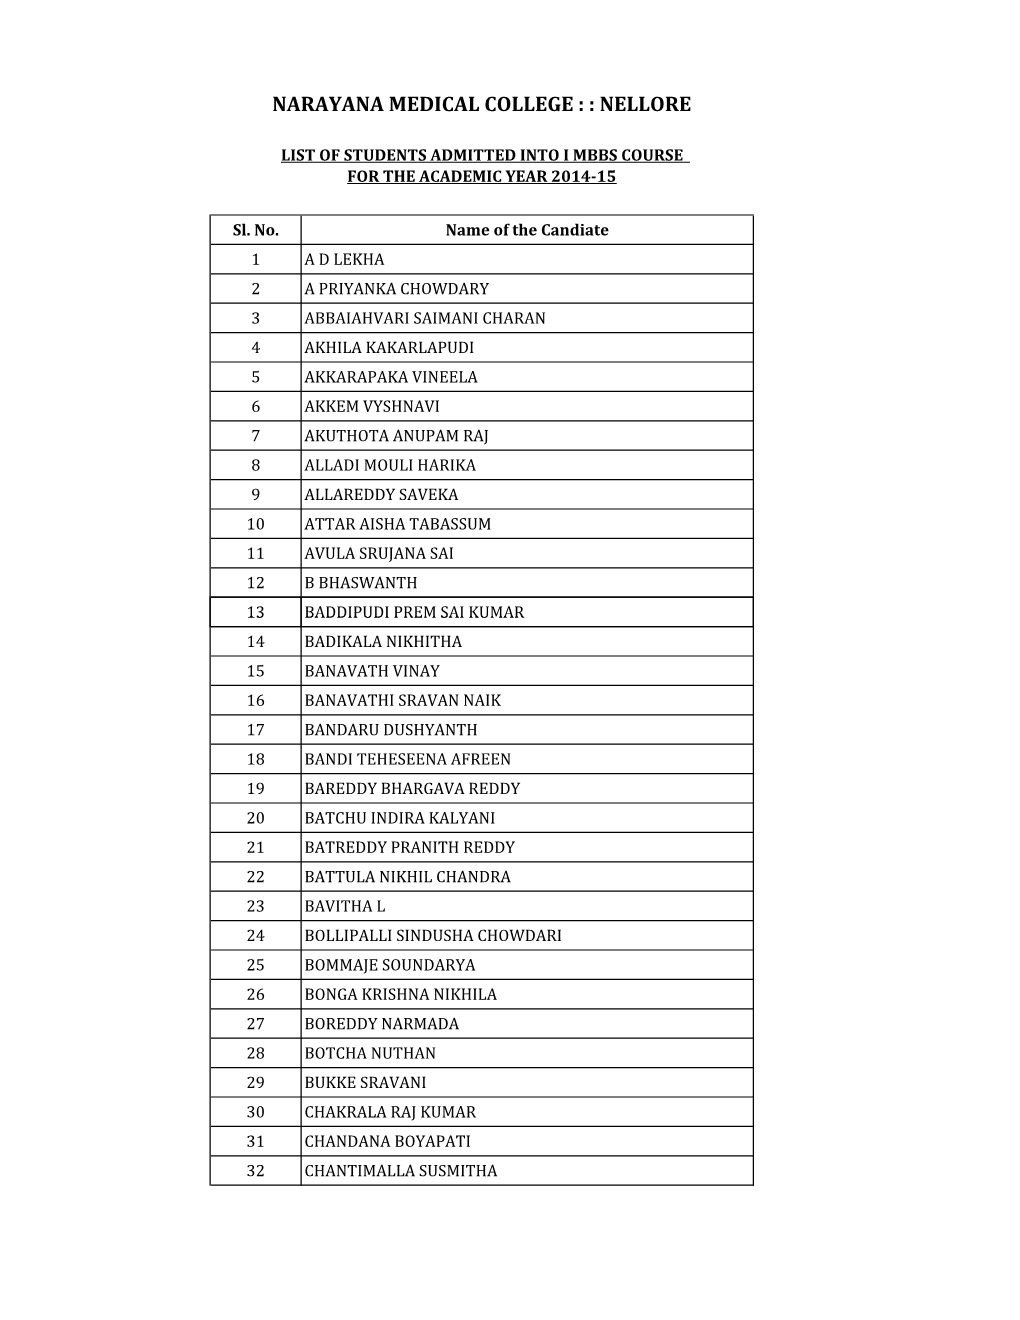 List of Students Admitted Into I Mbbs Course for the Academic Year 2014-15